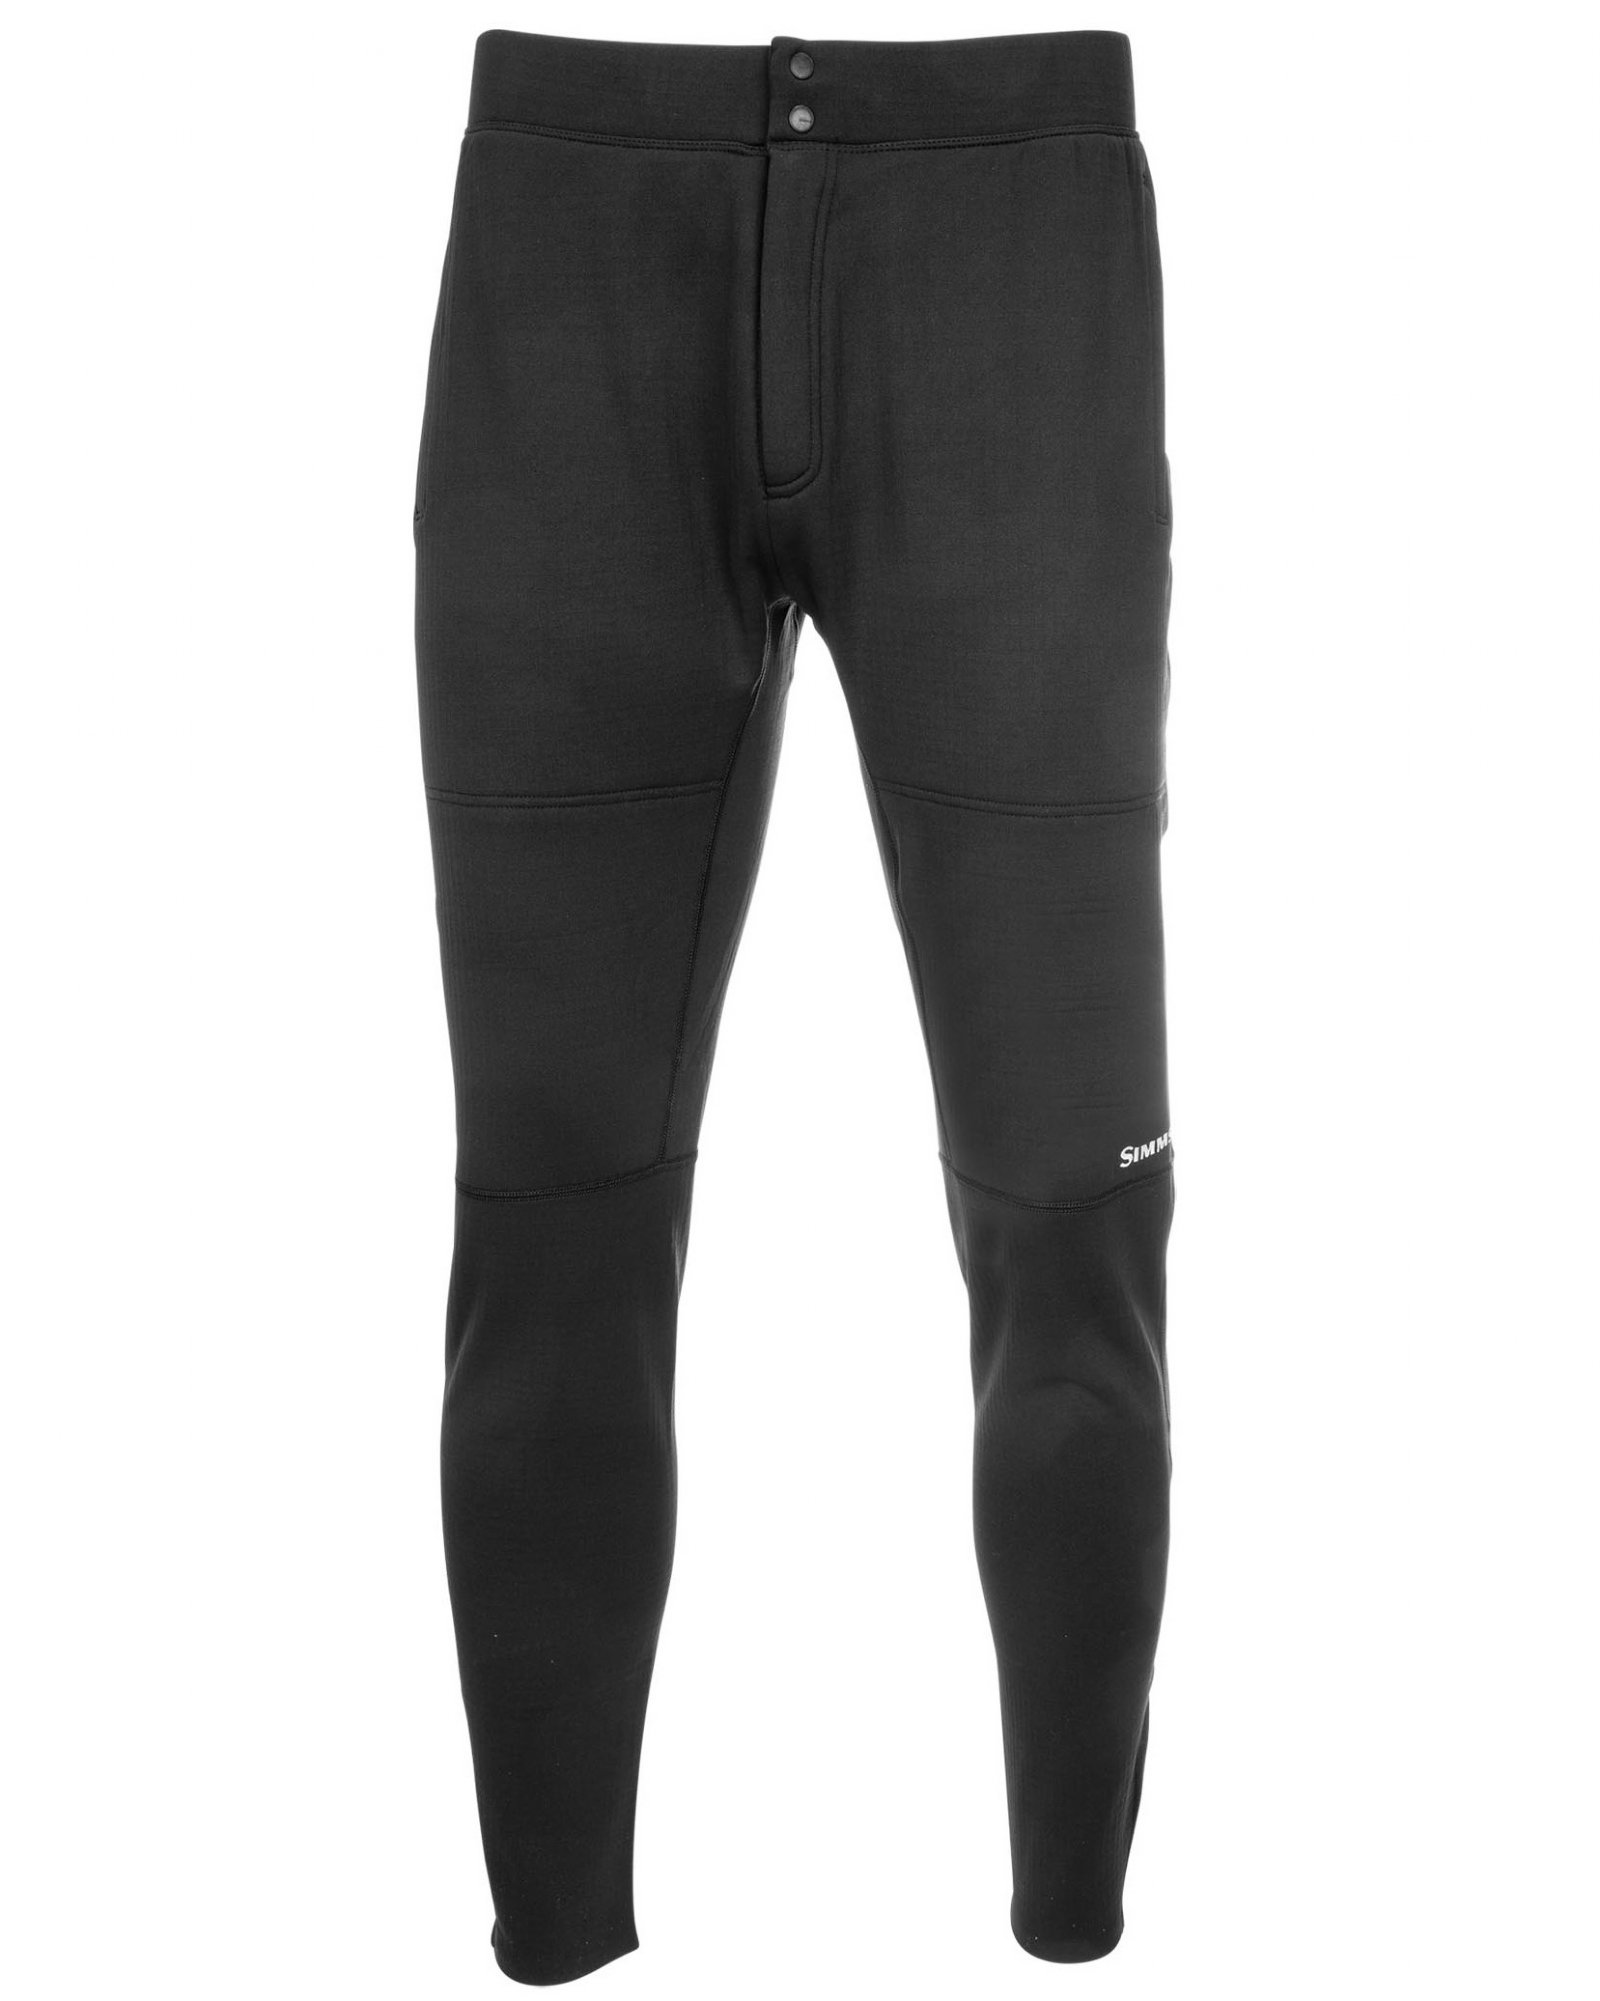 Men's Midweight Thermal Base Layer Bottom FS20M